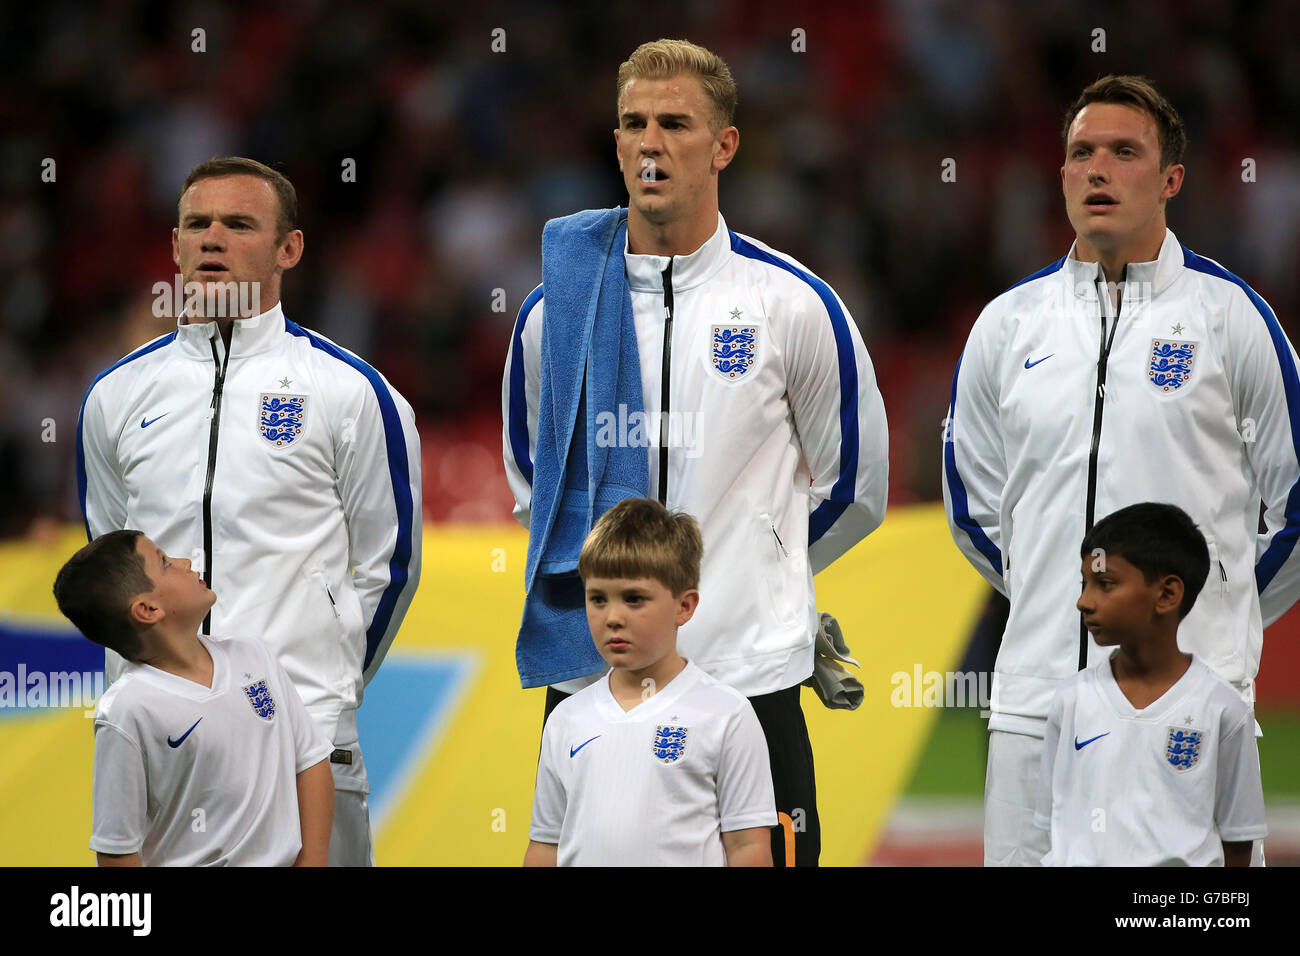 (left to right) England's Wayne Rooney, Joe Hart and Phil Jones sing the national anthem before the International Friendly at Wembley Stadium, London. PRESS ASSOCIATION Photo. Picture date: Wednesday September 3, 2014. See PA story SOCCER England. Photo credit should read: Nick Potts/PA Wire. RESTRICTIONS: Use subject to FA restrictions. Editorial use only. Commercial use only with prior written consent of the FA. No editing except cropping. Call +44 (0)1158 447447 or see www.paphotos.com/info/ for full restrictions and further information. Stock Photo